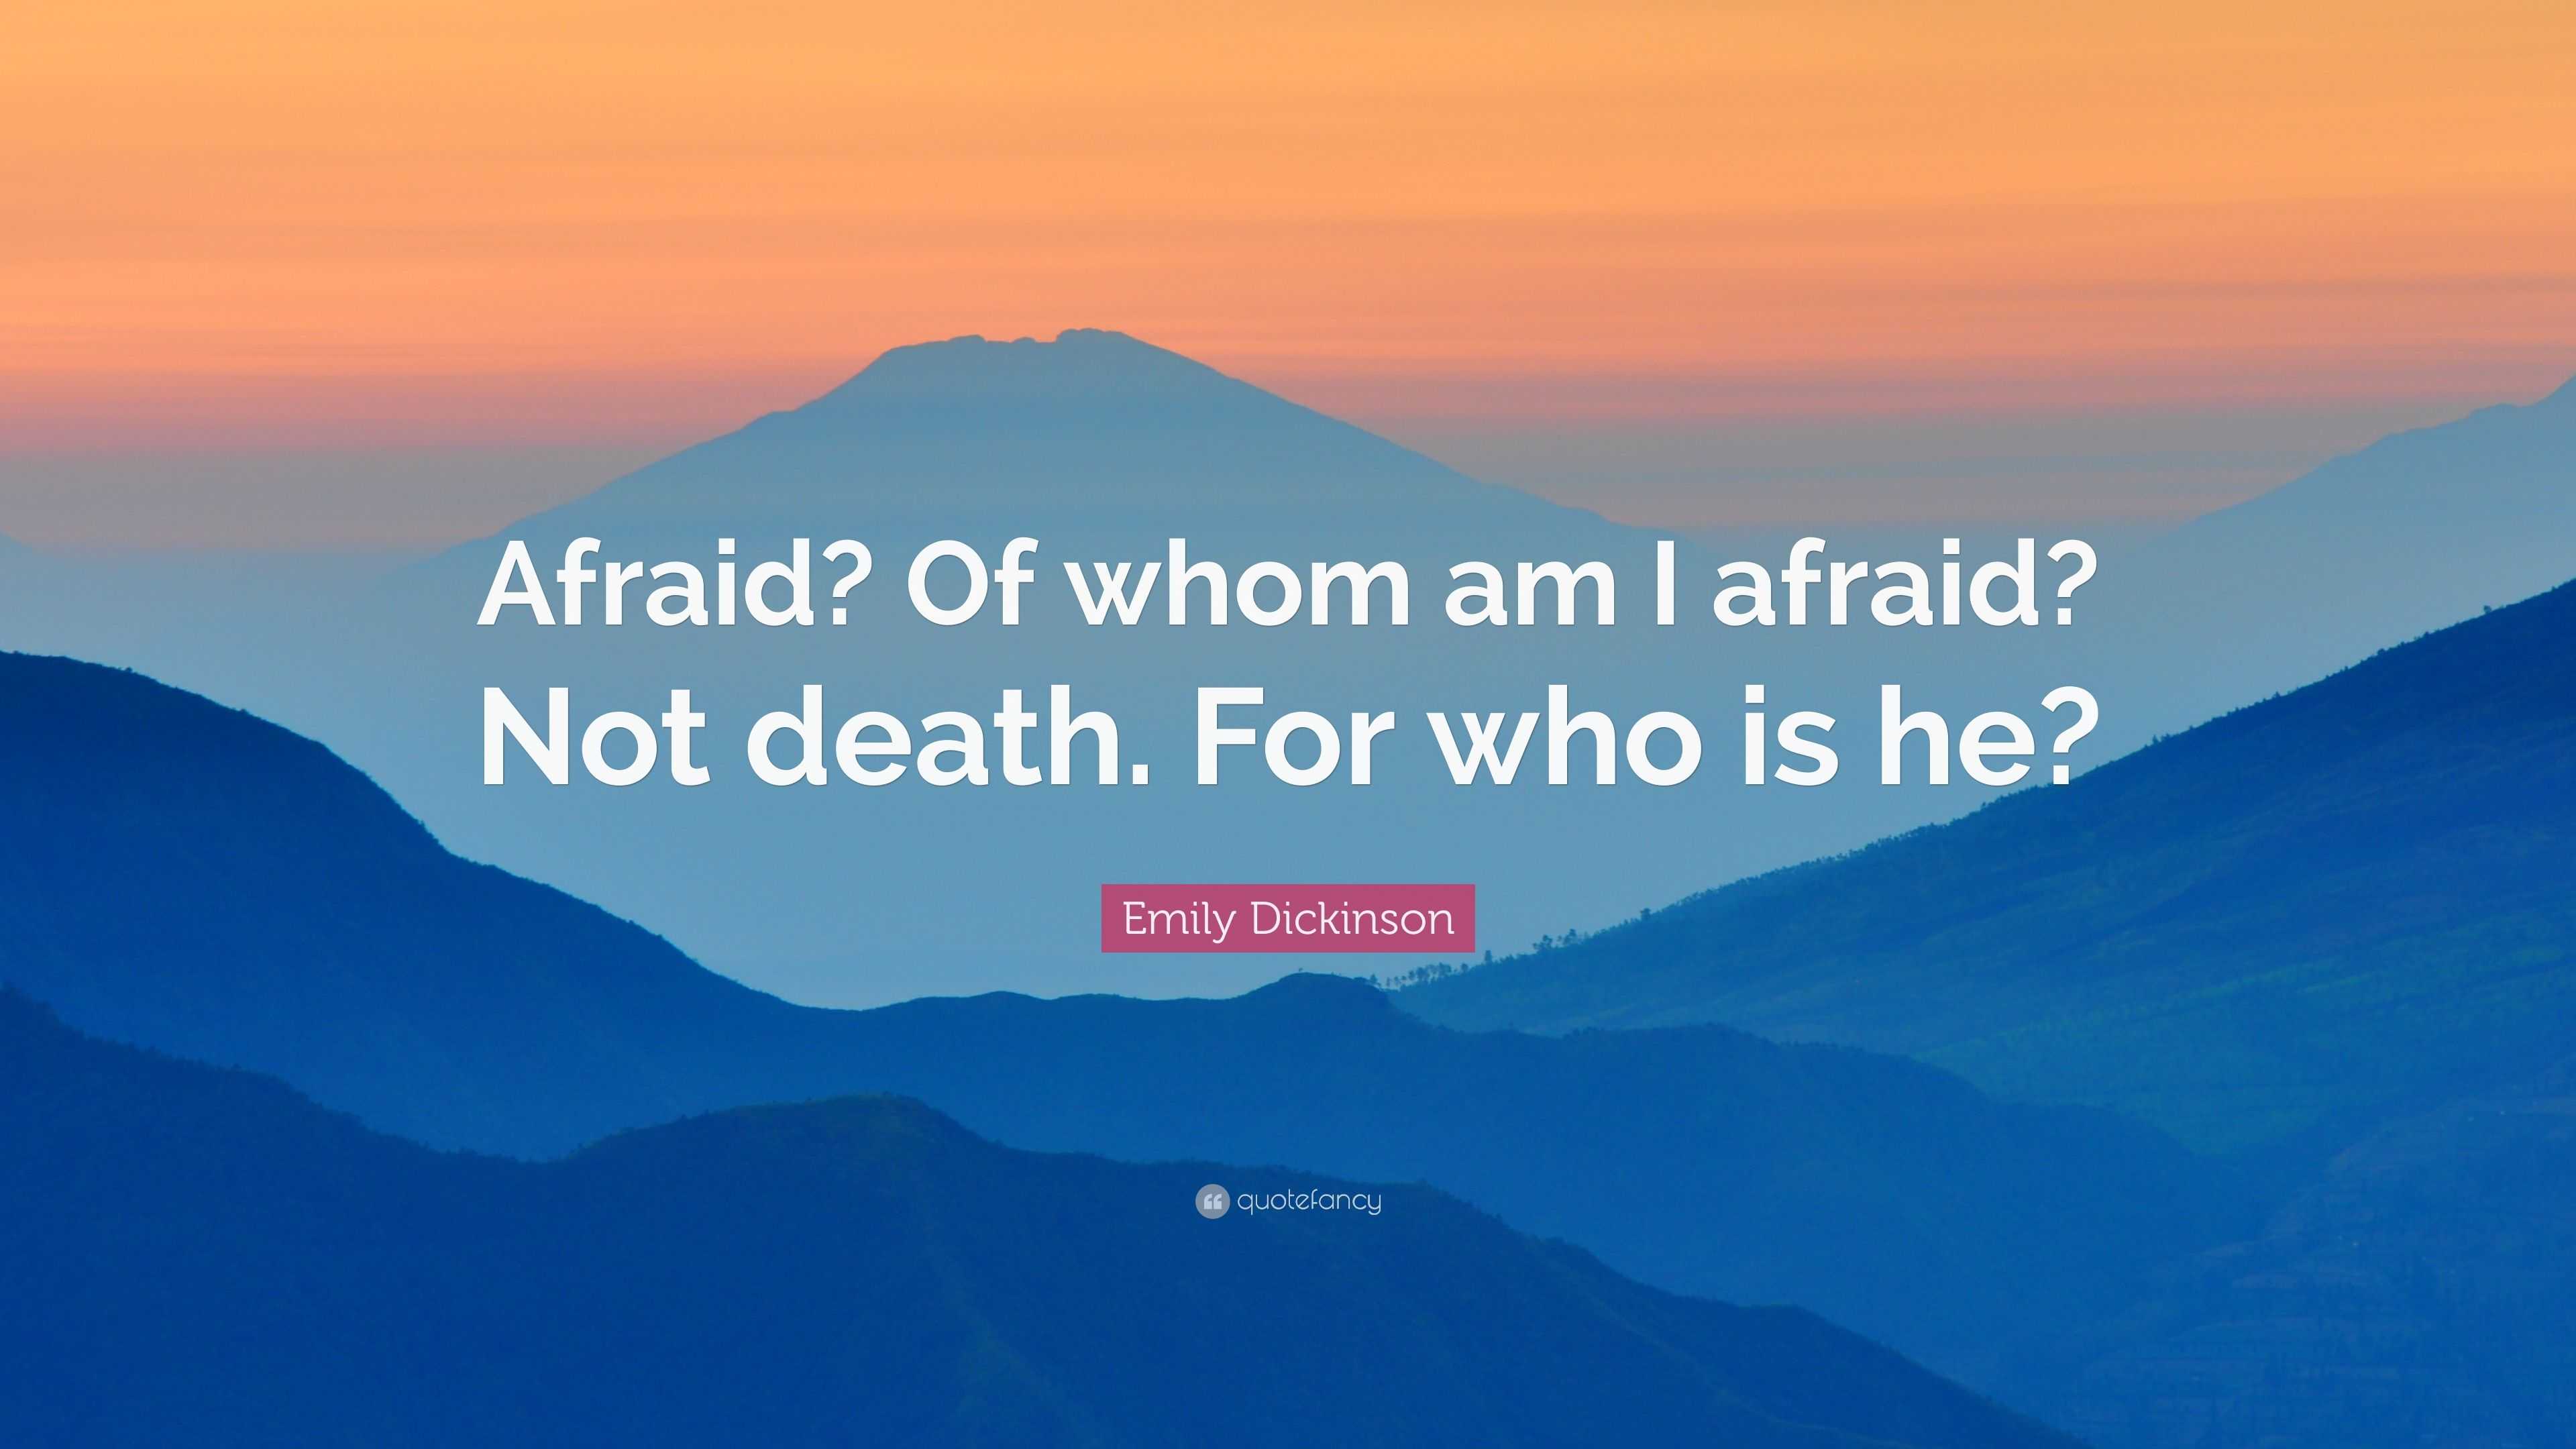 Emily Dickinson Quote “afraid Of Whom Am I Afraid Not Death For Who Is He”